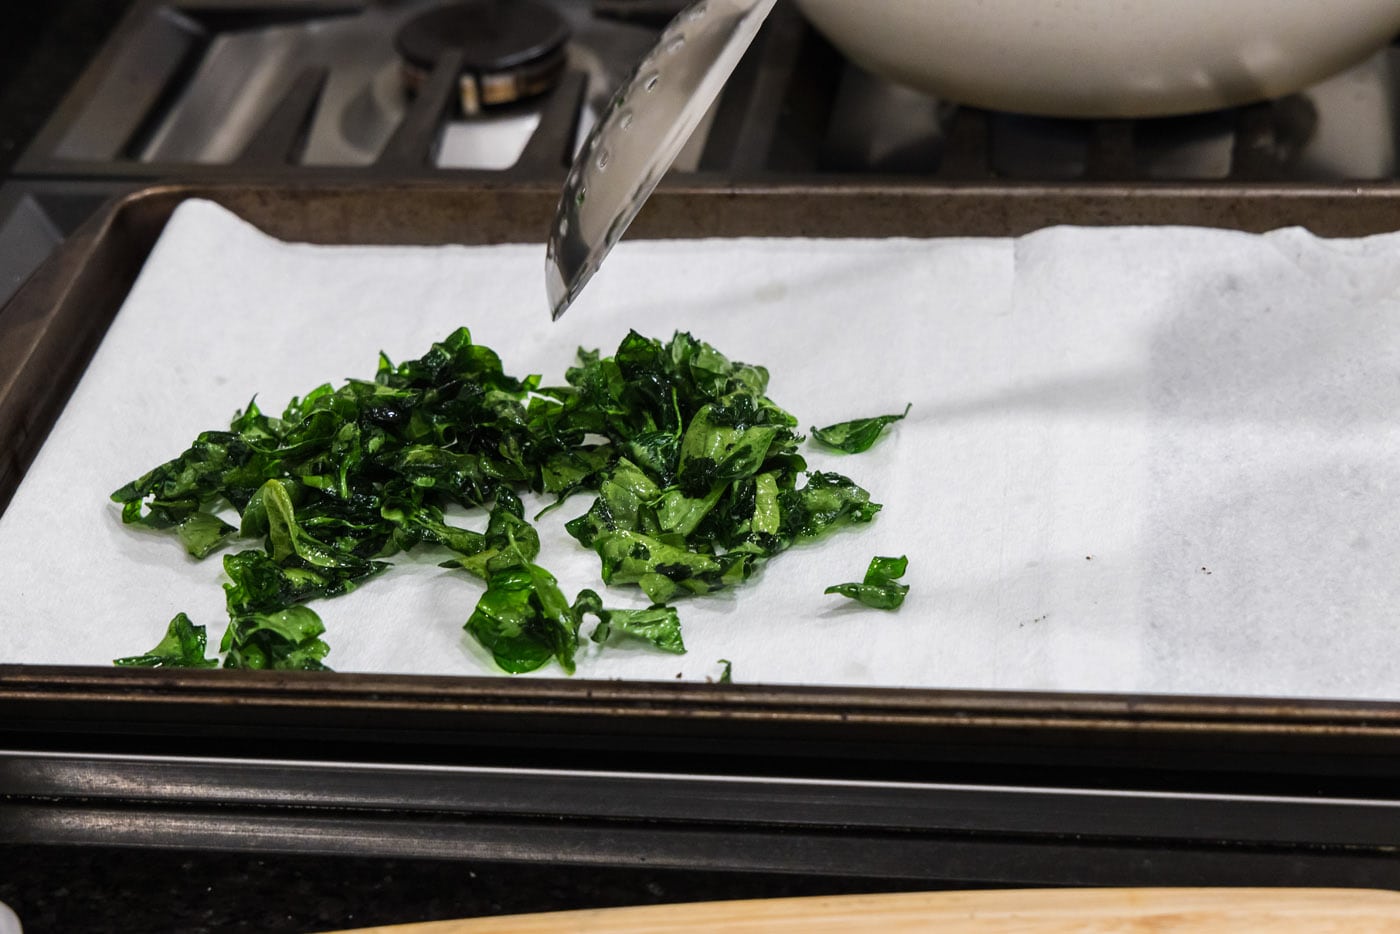 removing spinach from hot oil to drain on paper towels